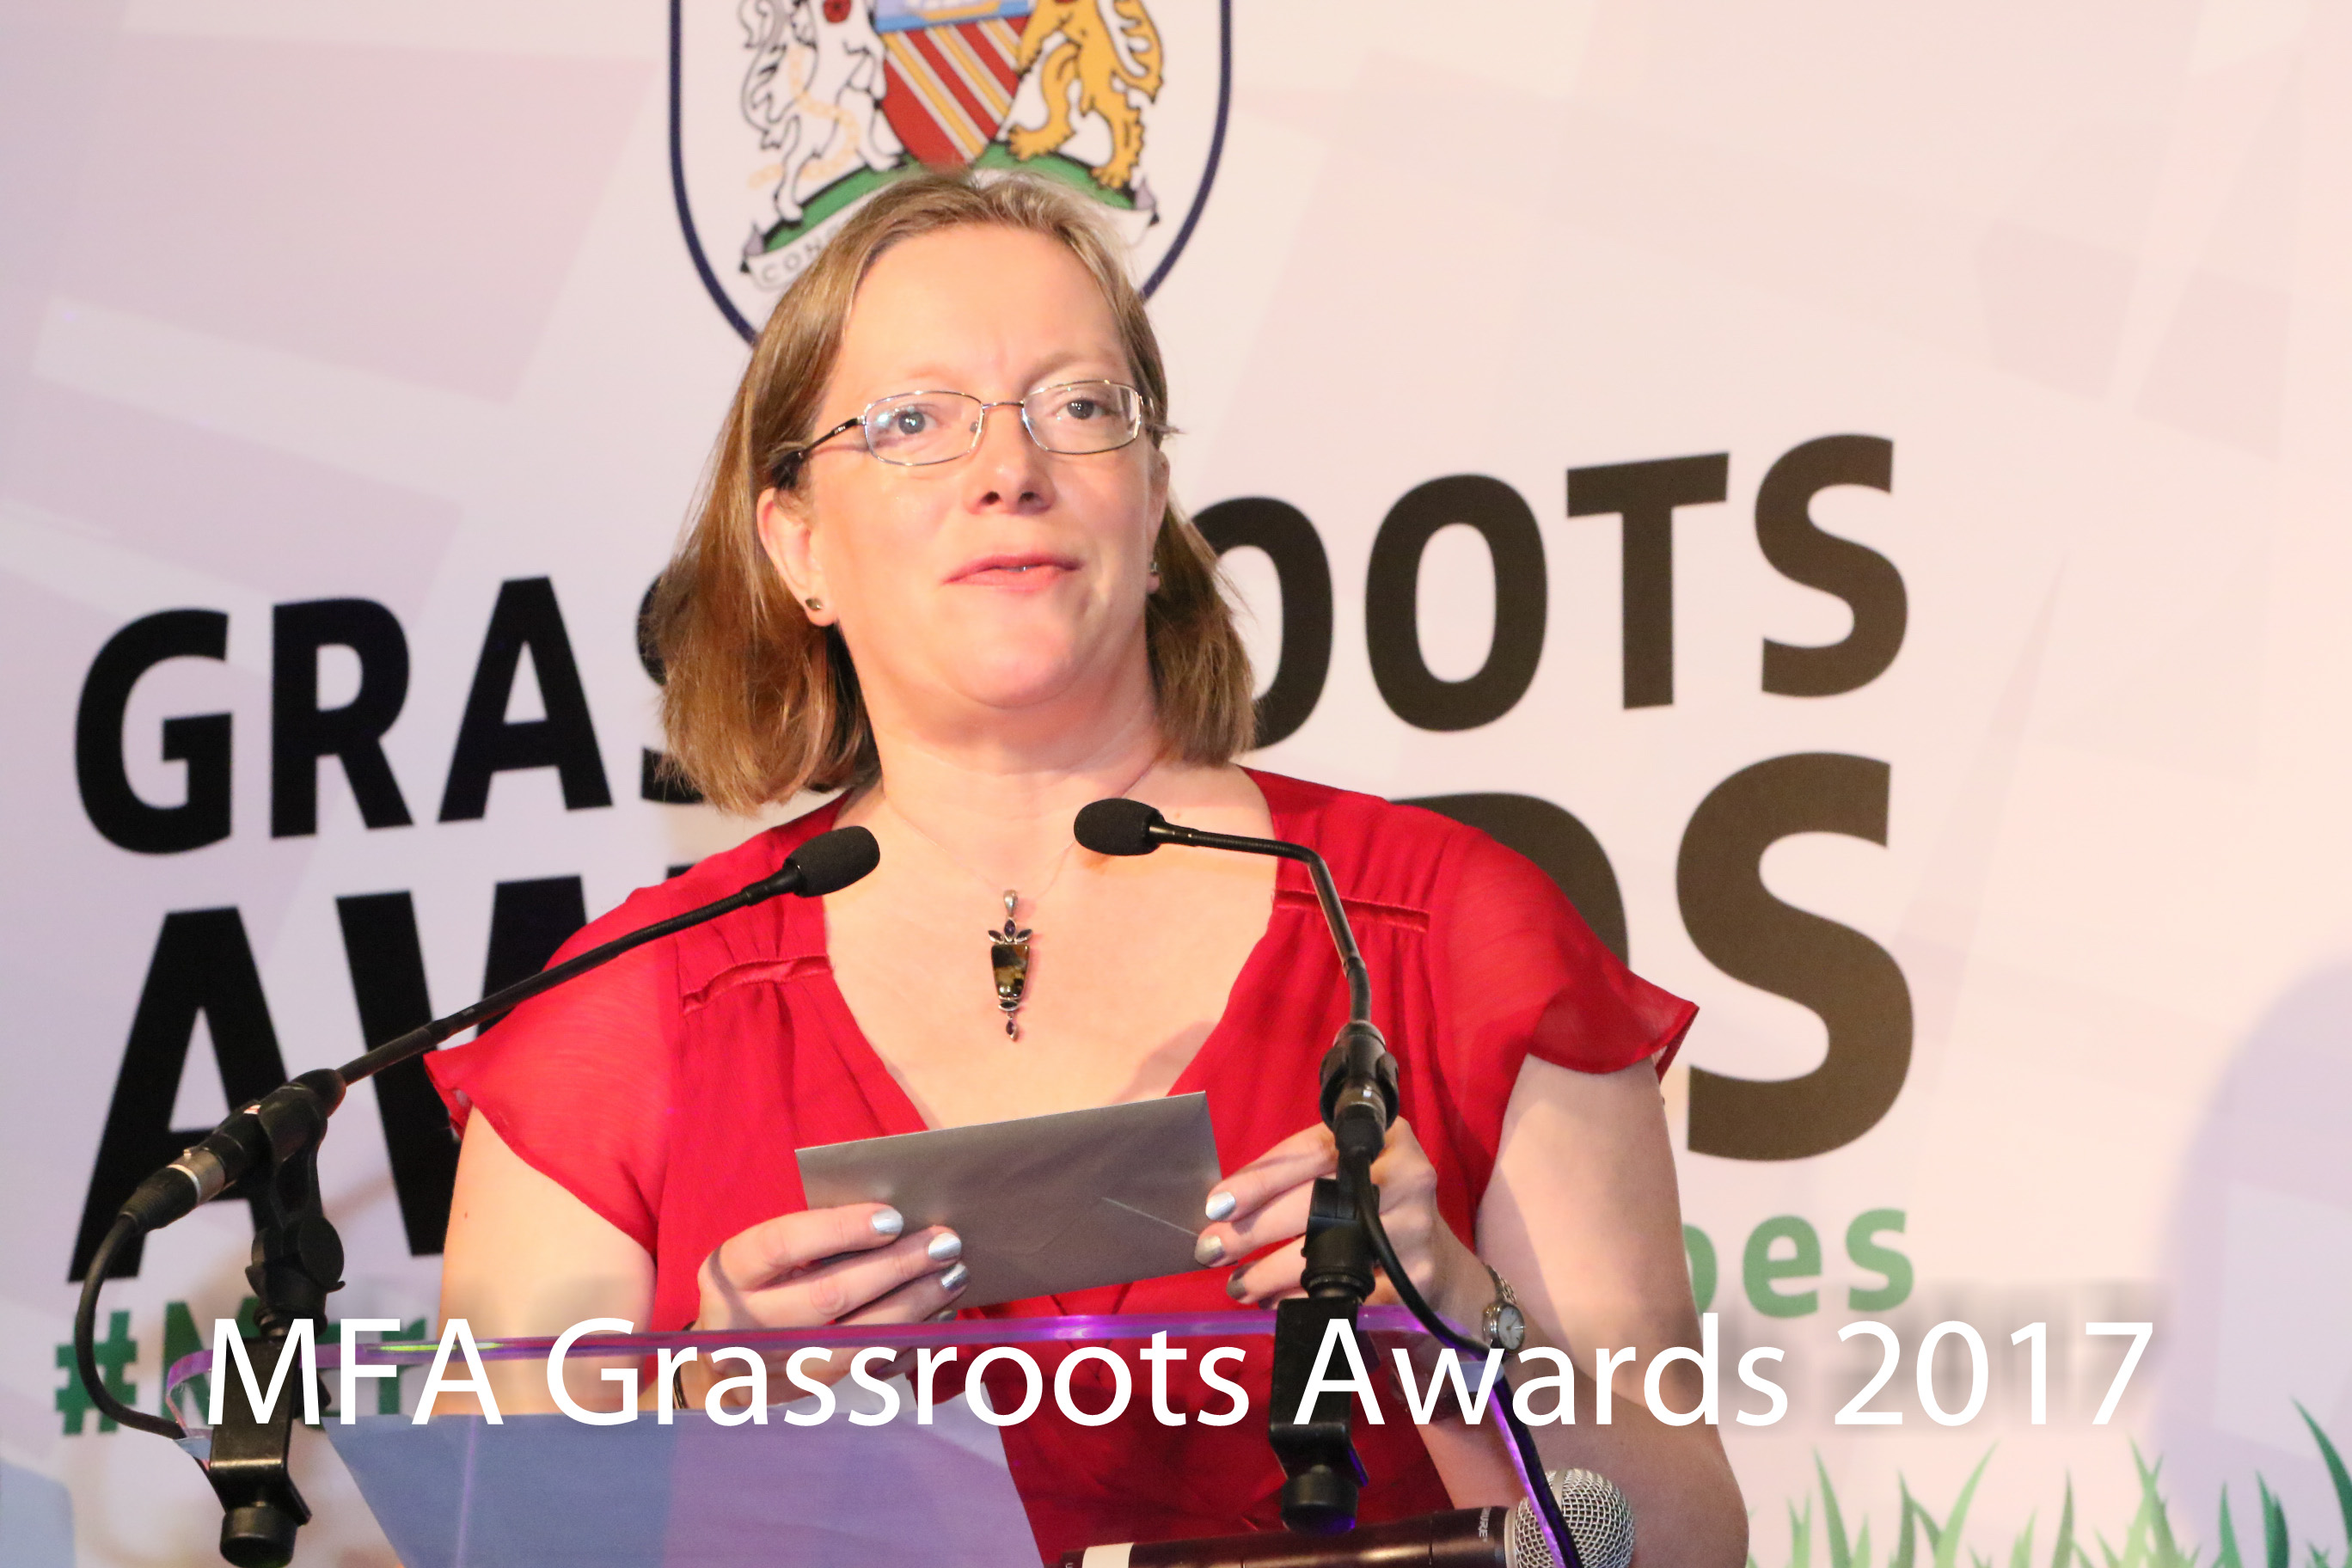 Kate Ramsey at the 2017 Manchester FA Grassroots Awards.